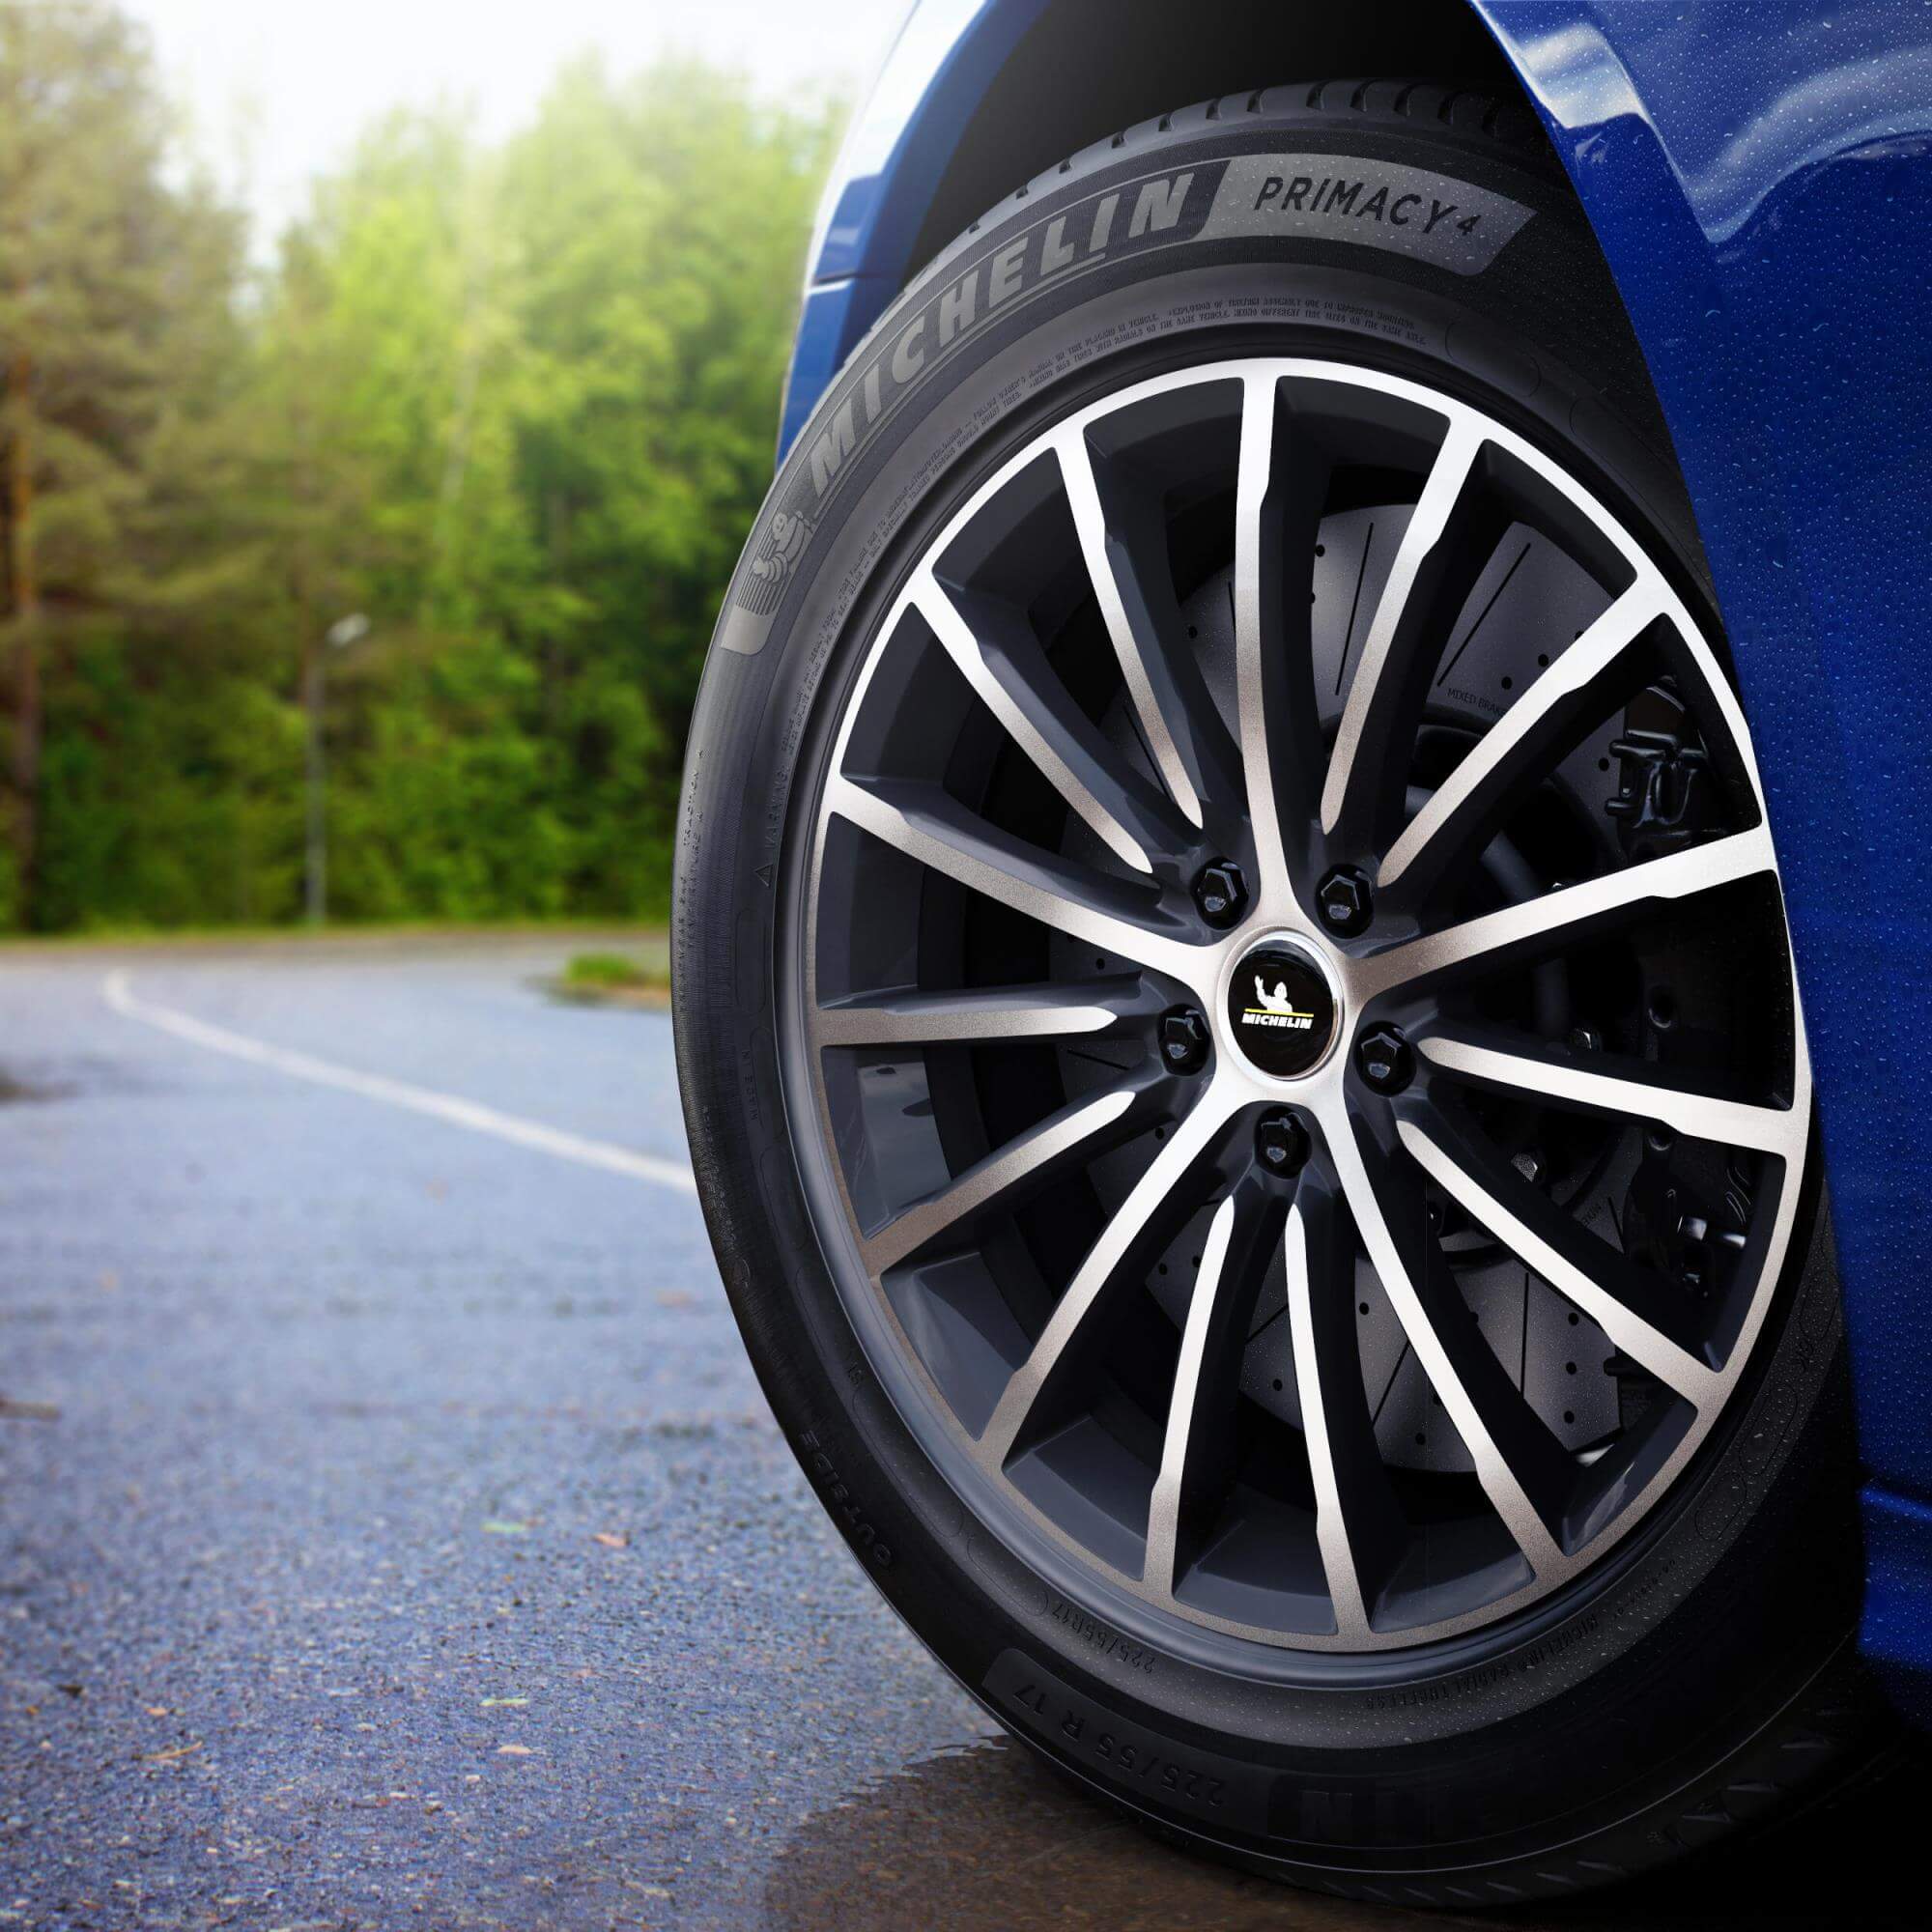 Michelin Primacy tyres fitted to a blue car